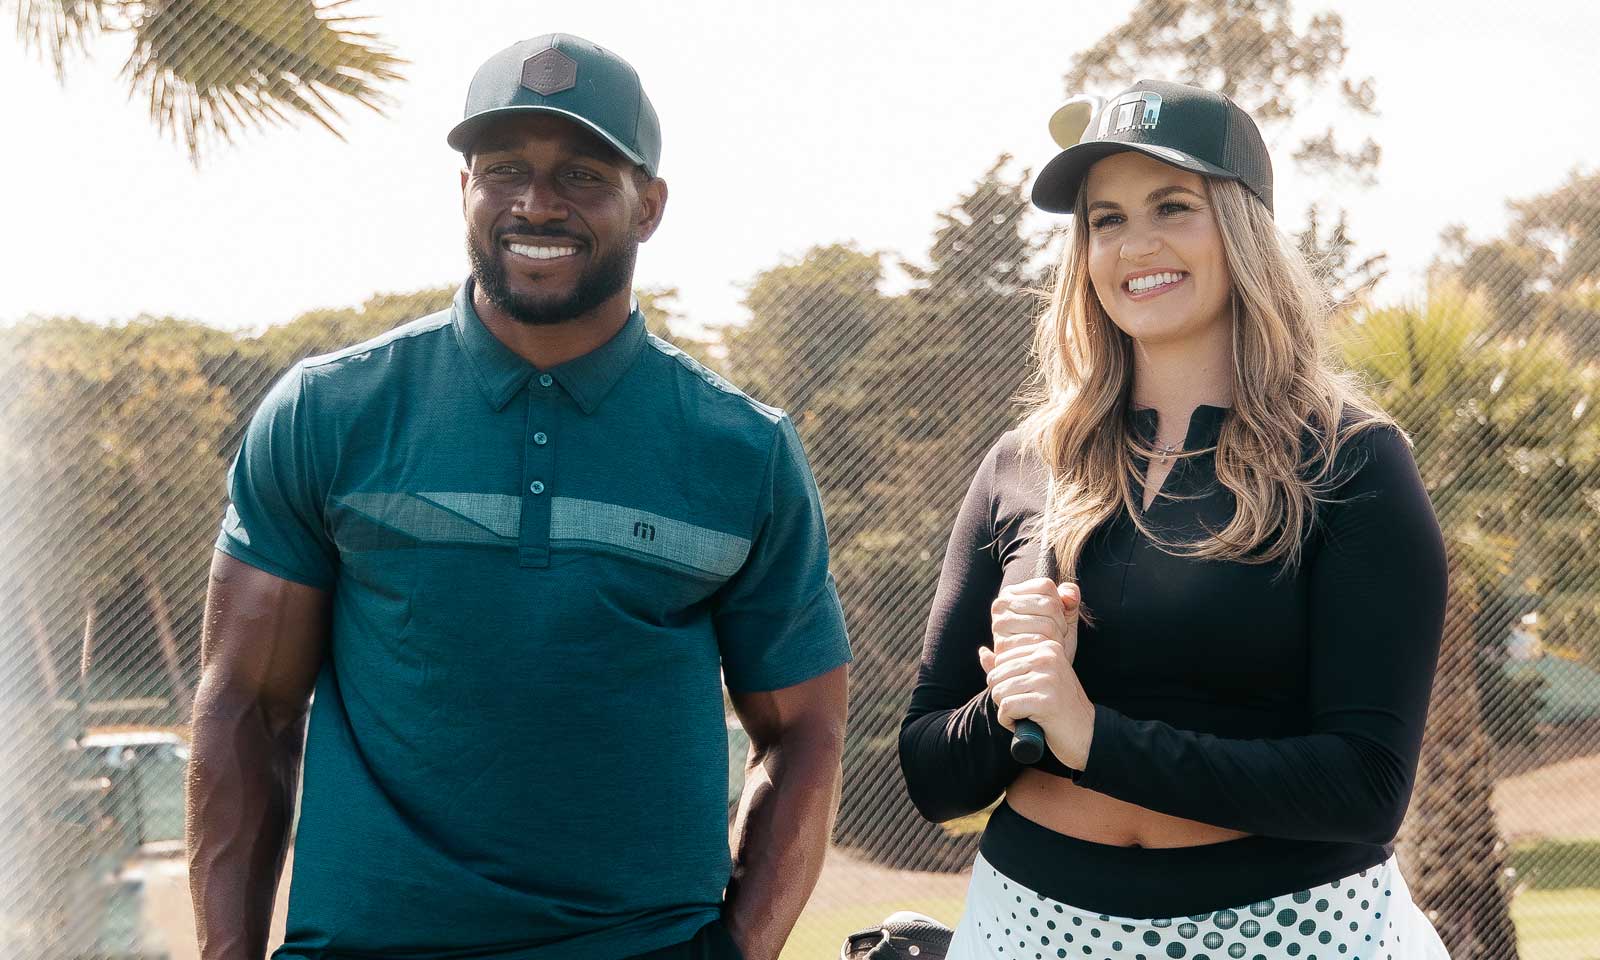 Athletes And Entertainers Unite For Golf And Diversity At Change The Game -Reggie Bush and Jenna Brady